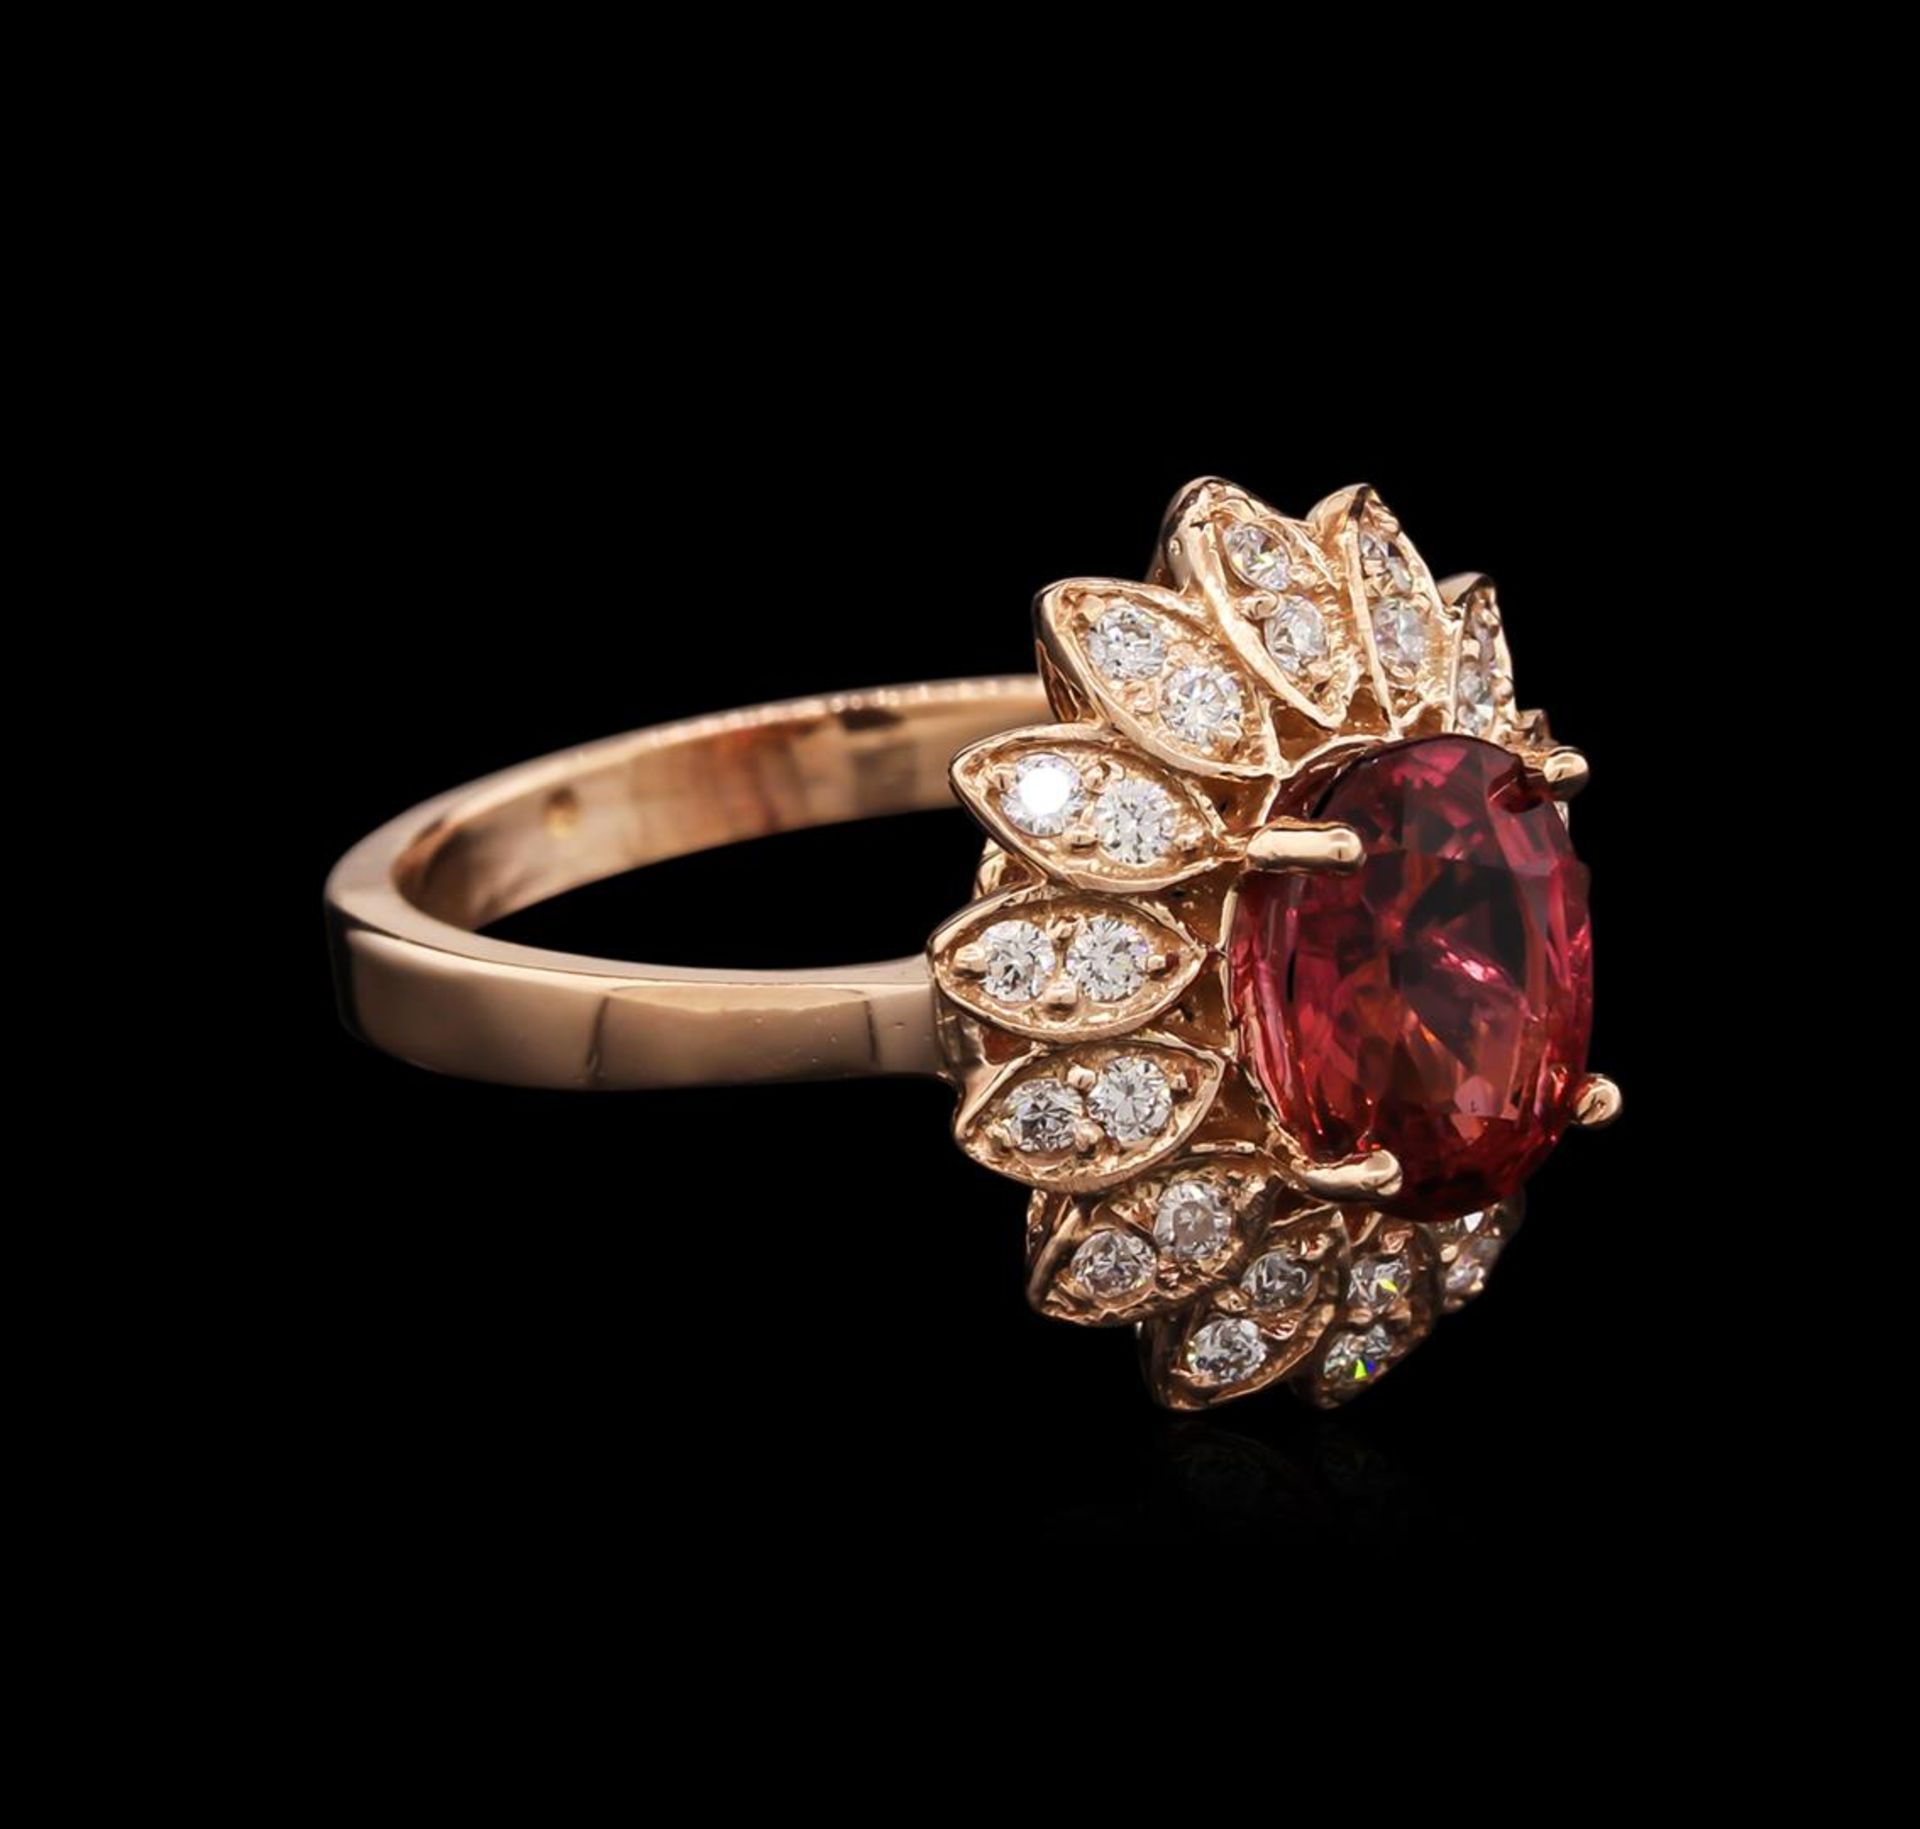 2.22 ctw Pink Tourmaline and Diamond Ring - 14KT Rose Gold - Image 2 of 2